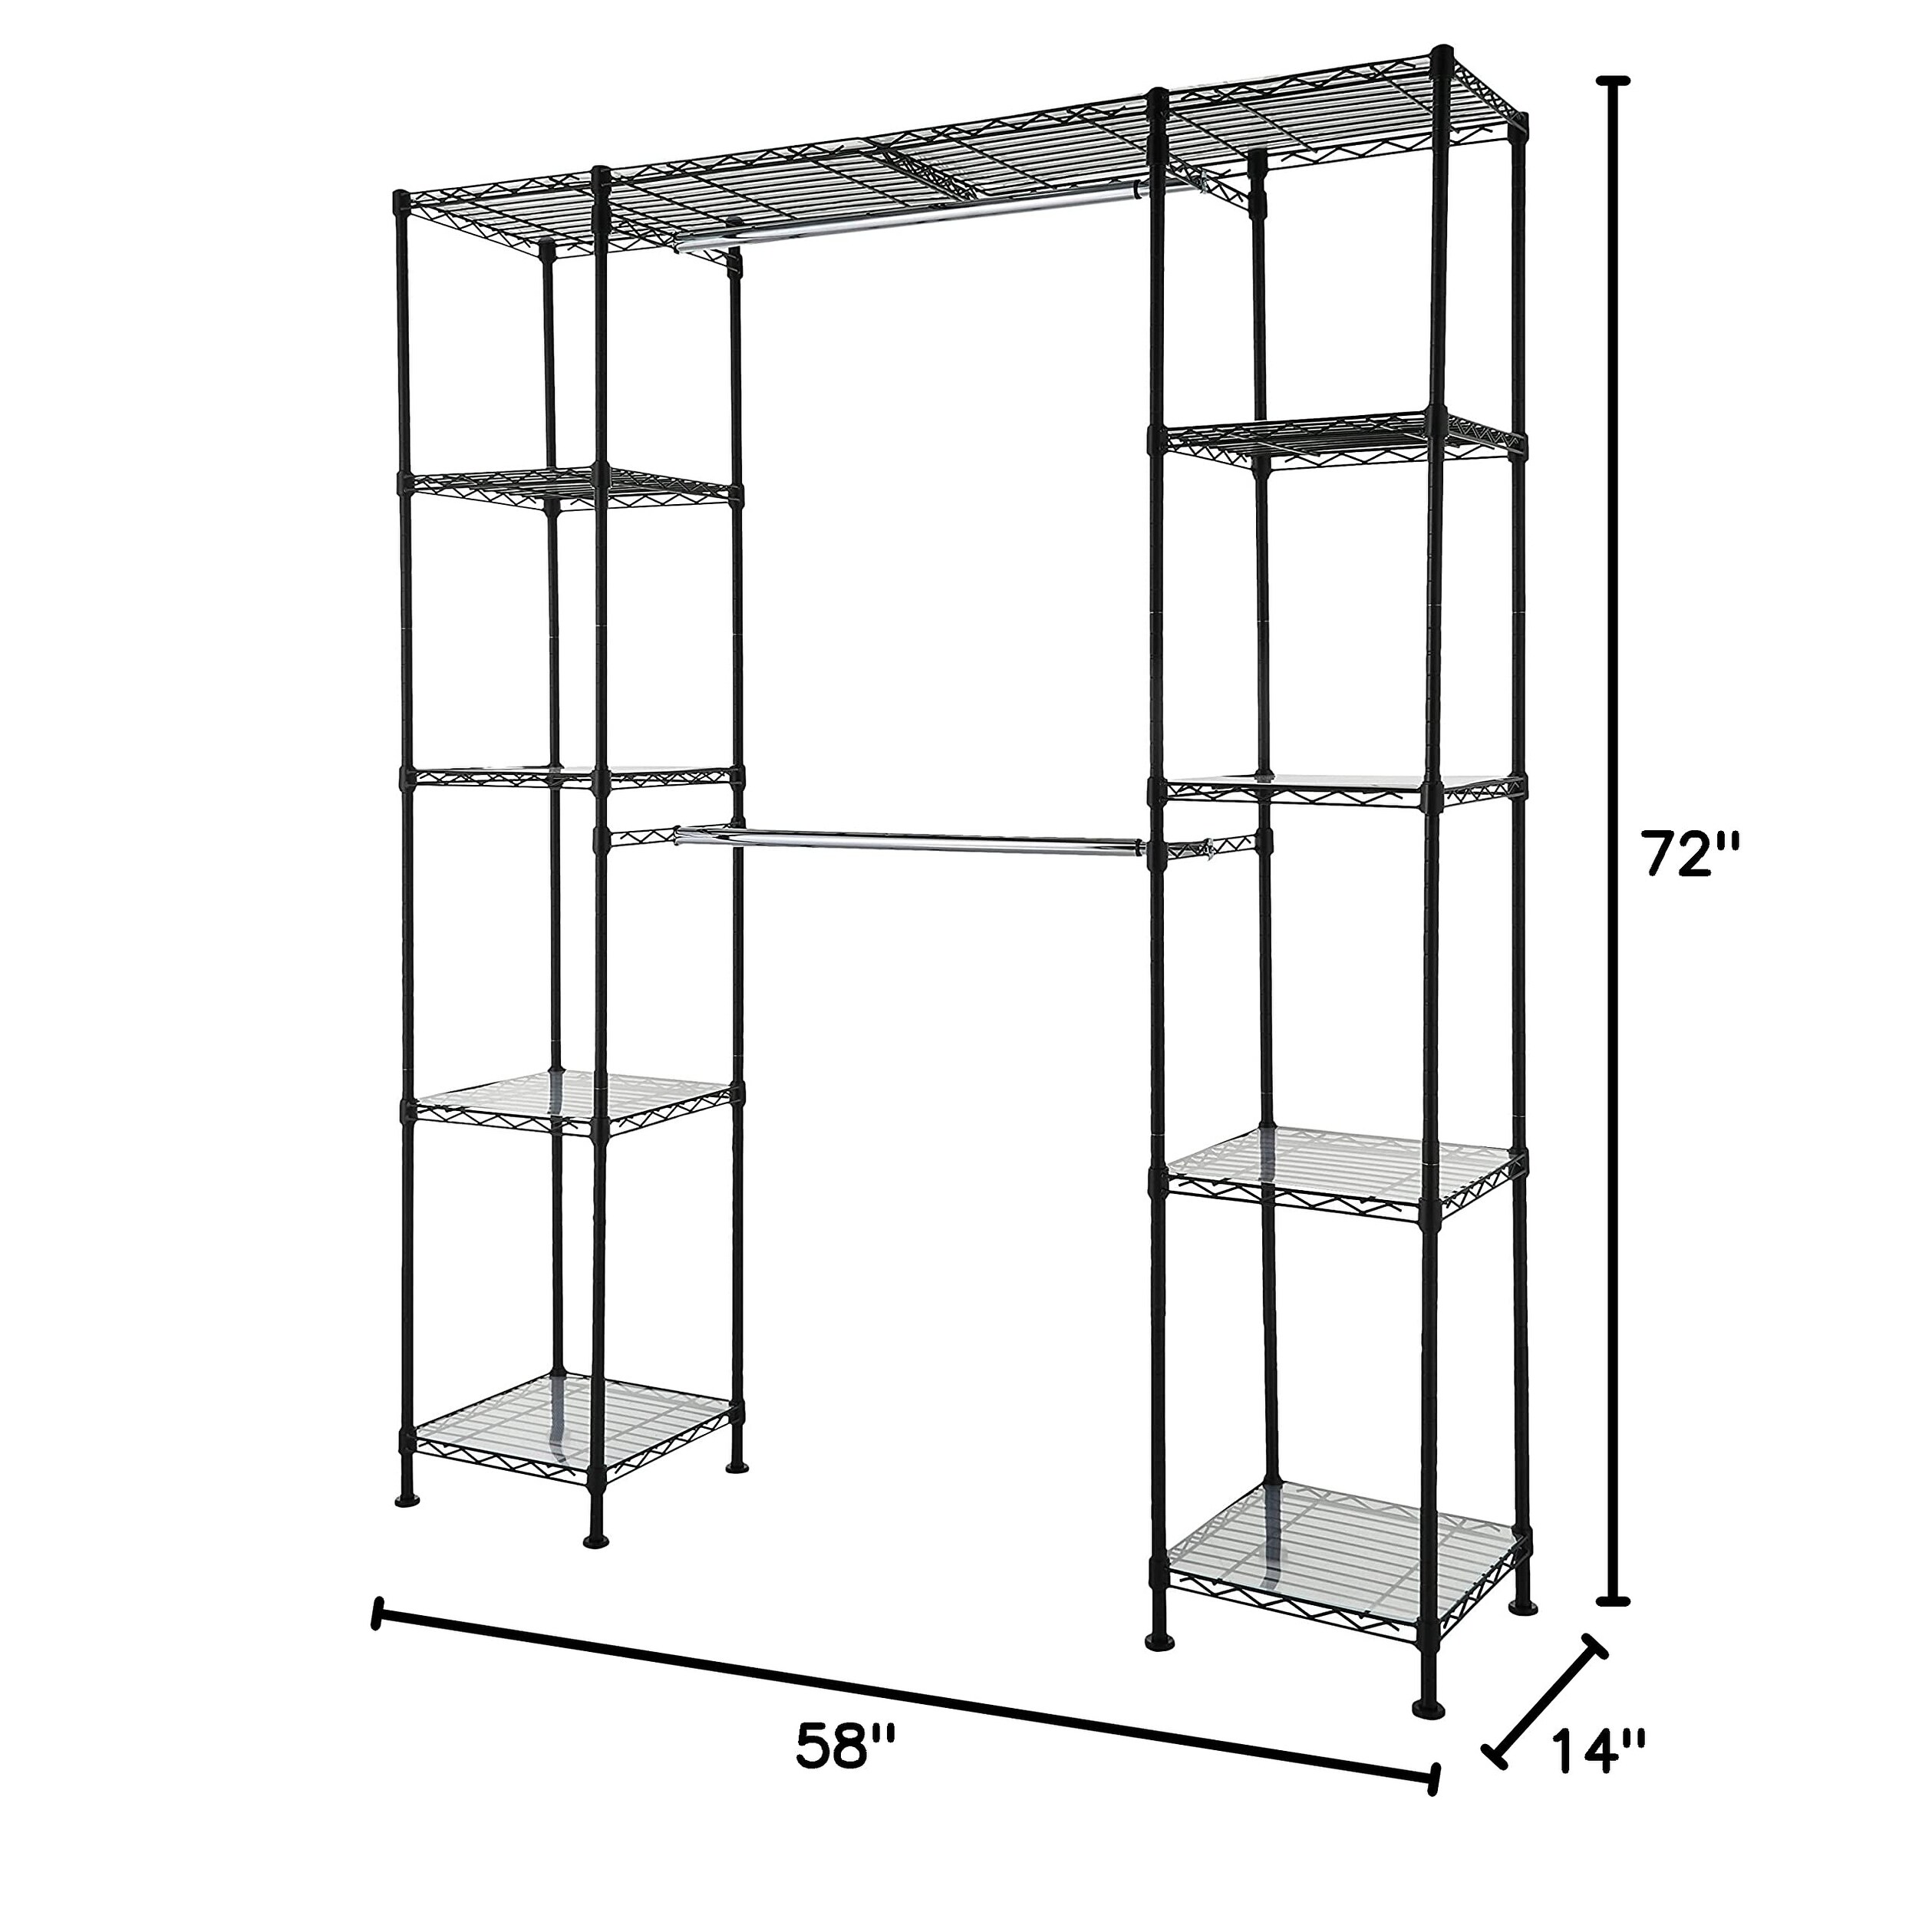 https://ak1.ostkcdn.com/images/products/is/images/direct/dadc38cc8a589bee1cfea8d178e5f4b65aab55be/Expandable-Metal-Hanging-Storage-Organizer-Rack-Wardrobe-with-Shelves%2C-14%22-63%22-x-58%22-72%22%2C-Black.jpg